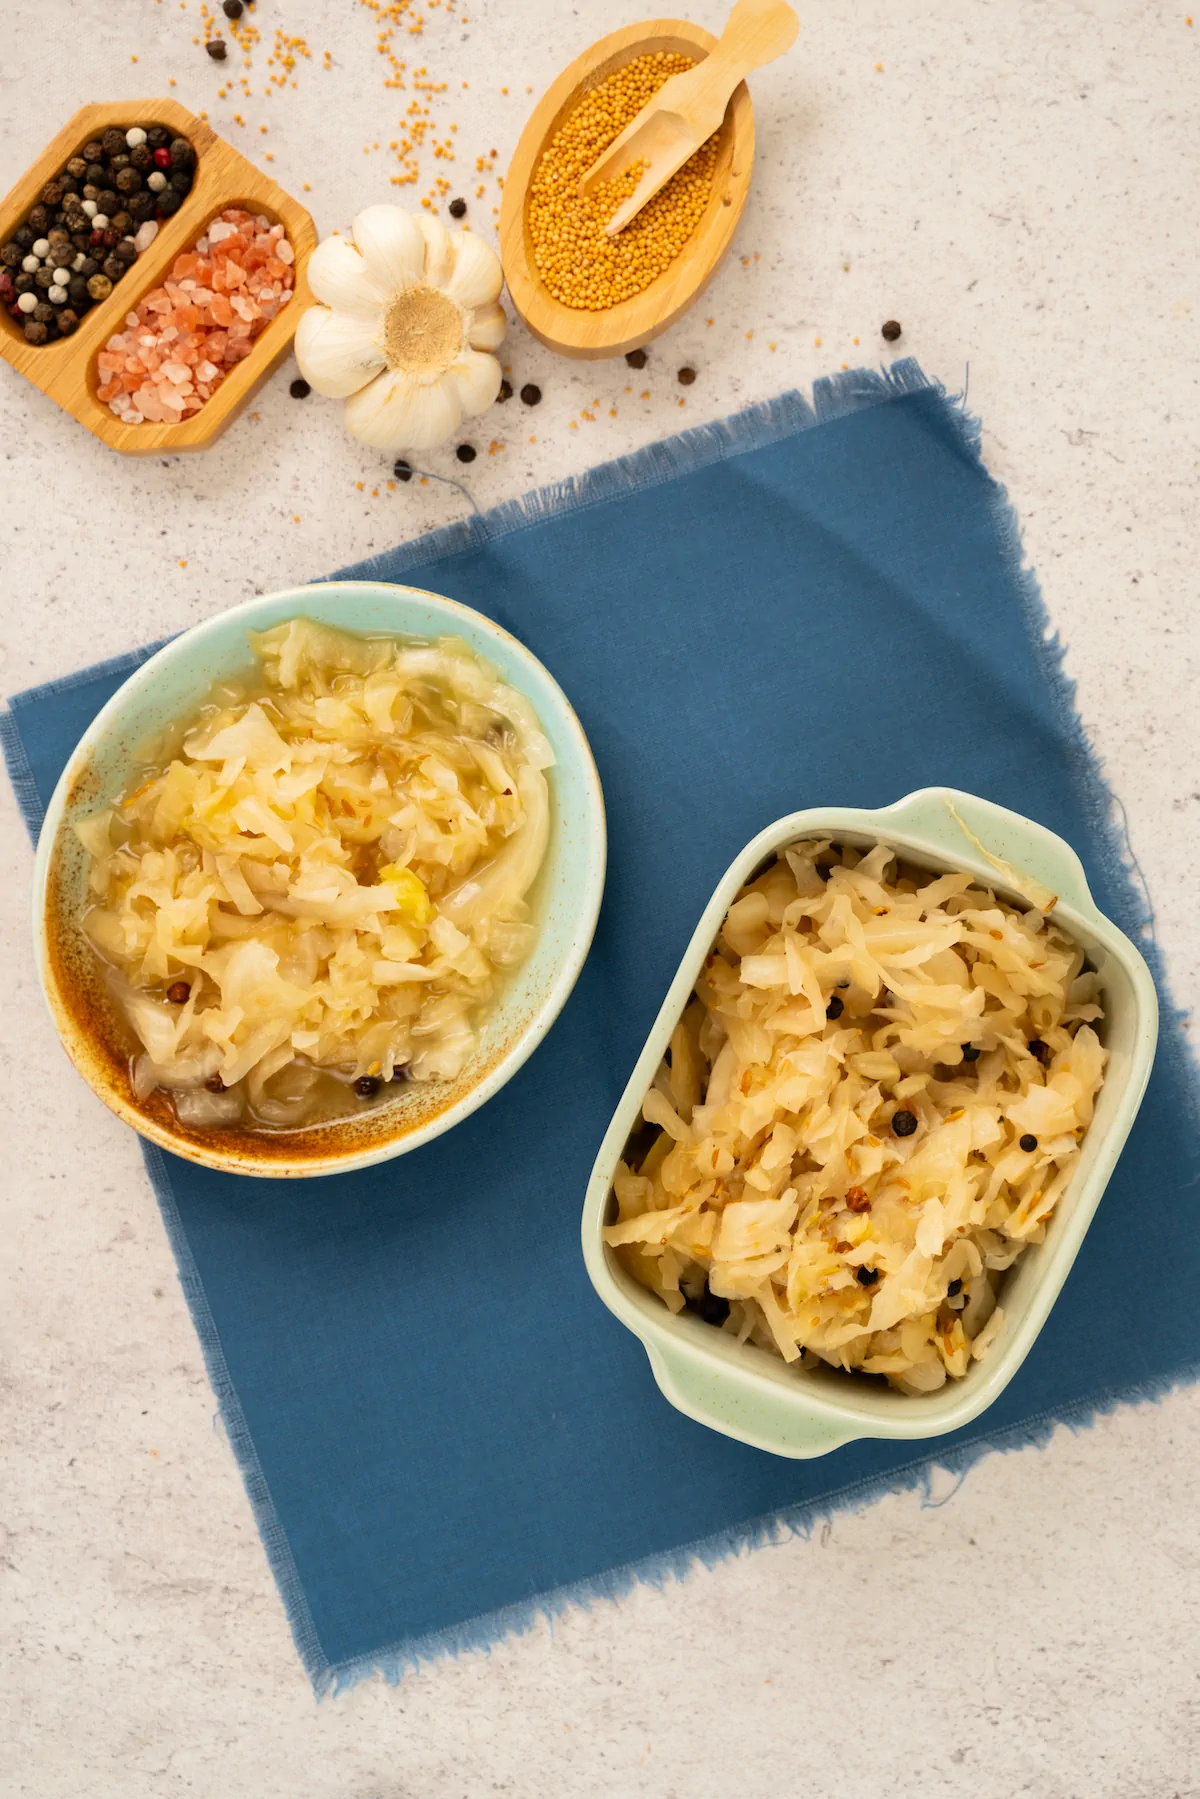 Homemade tangy sauerkraut served in the ceramic bowls.